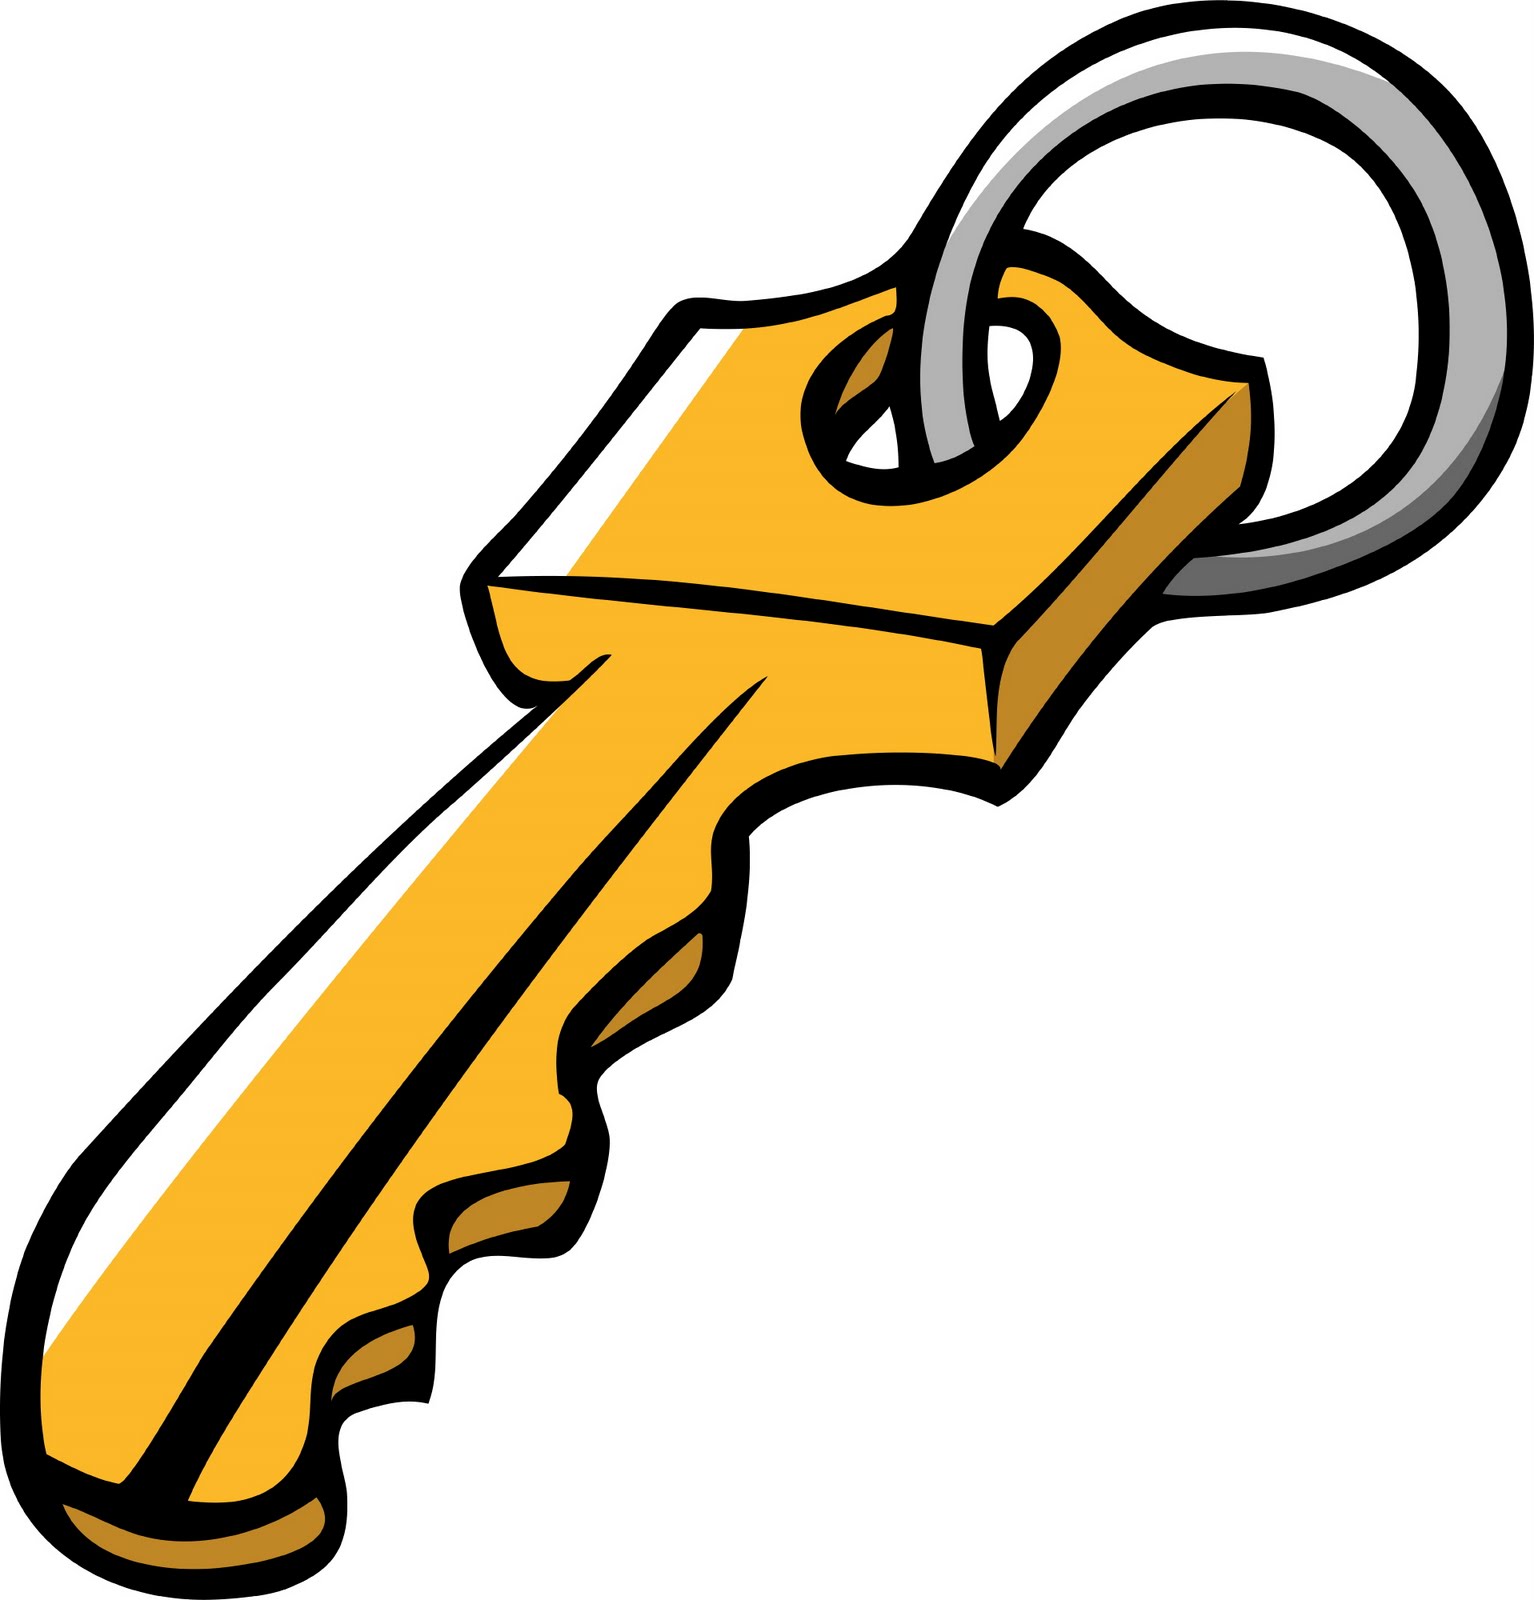 Free Pictures Of A Key Download Free Clip Art Free Clip Art On Clipart Library